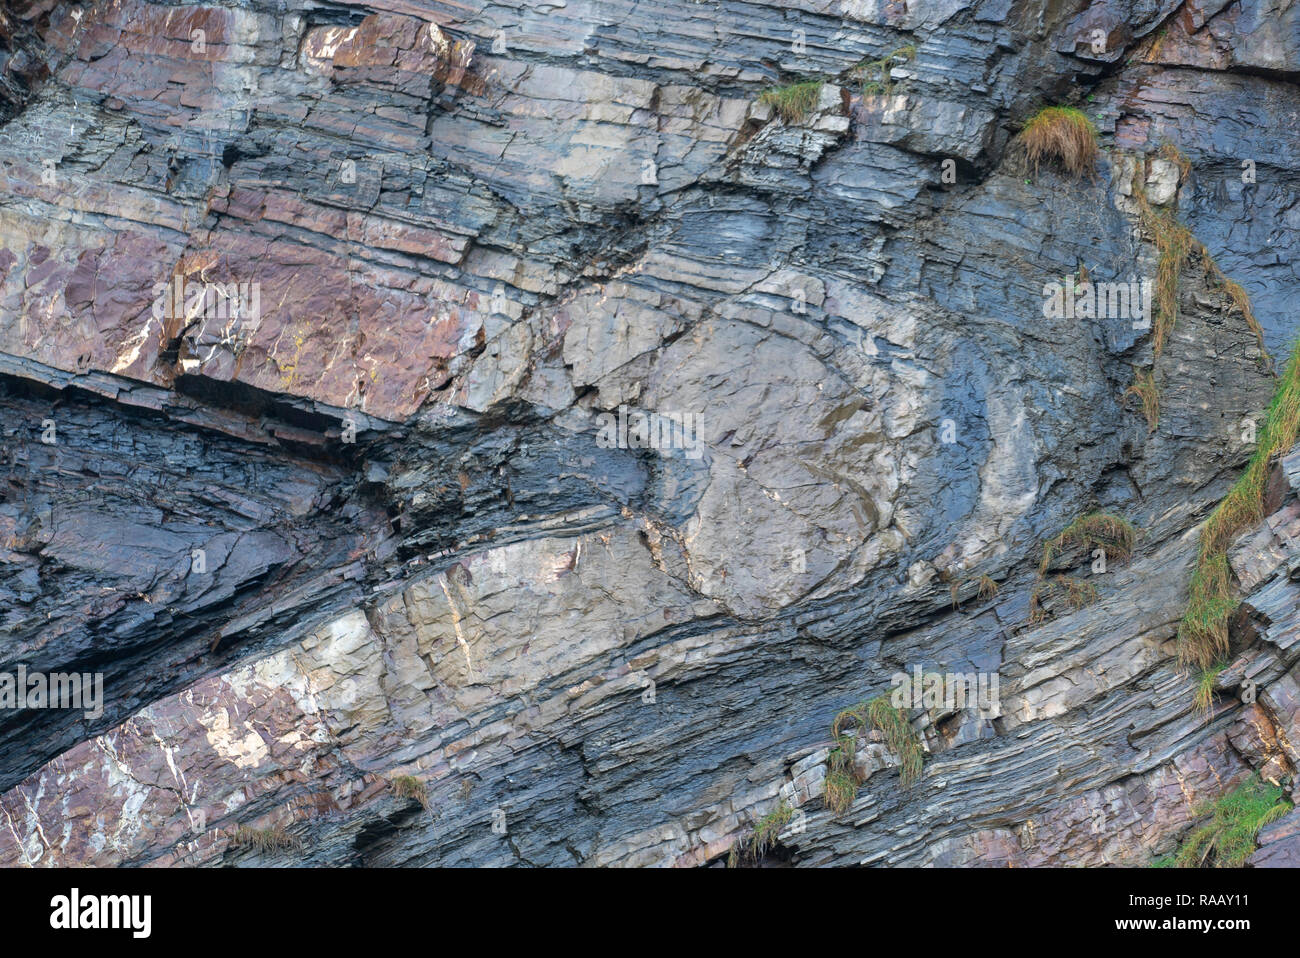 Spectacularly folded sequence of alternating grey shales and sandstones detail [5 of 5], North Cornwall UK Stock Photo